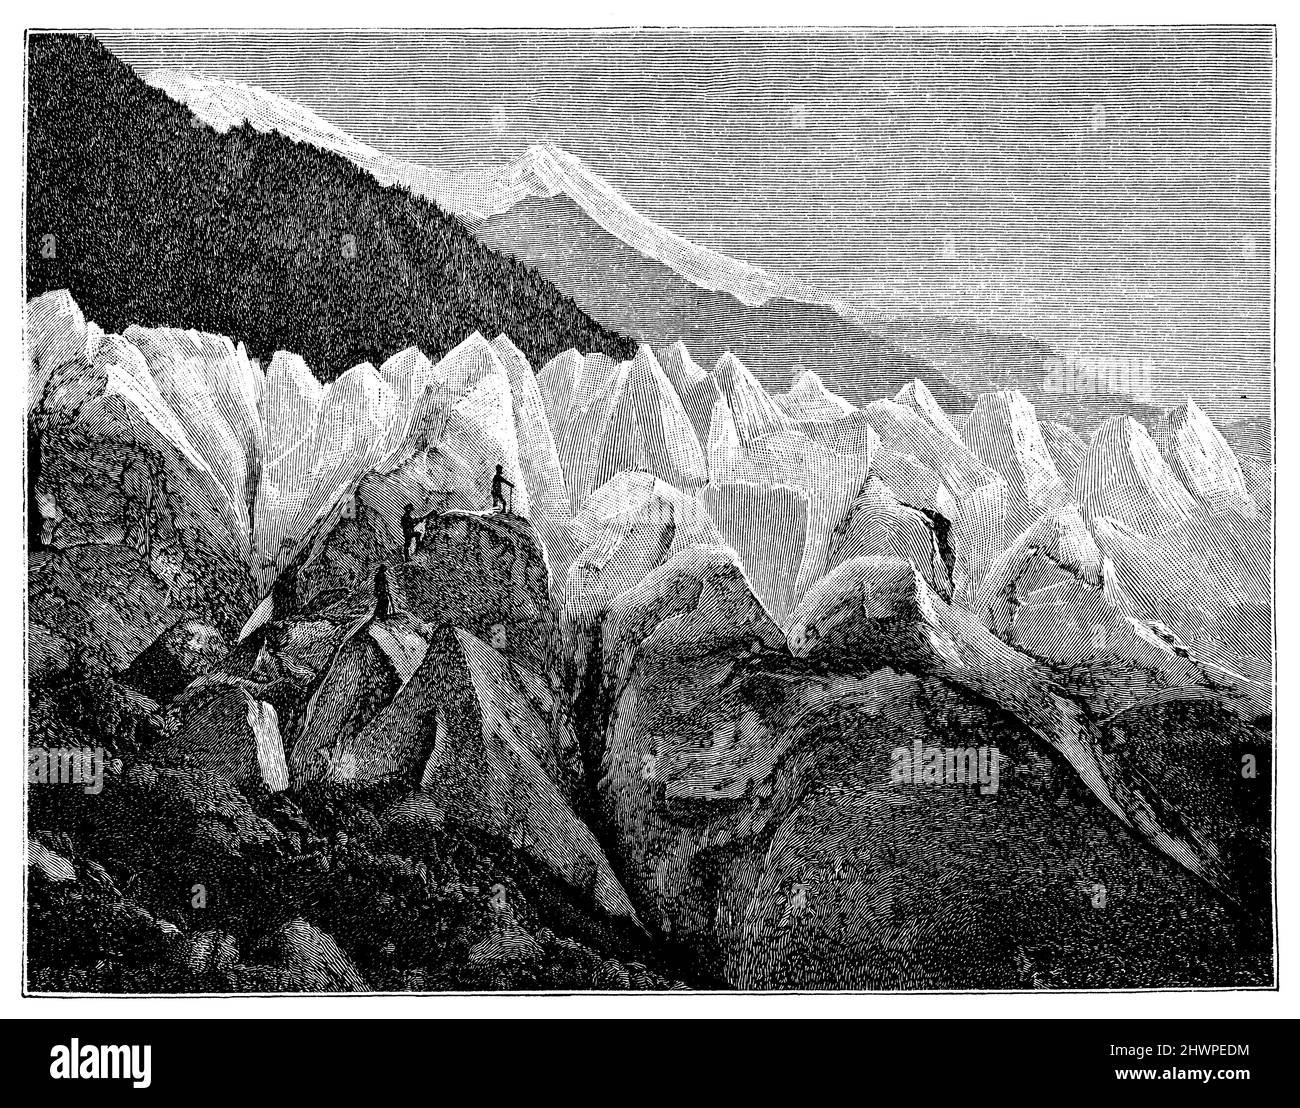 Ice pyramids of the Bosson glacier on the northern slope of Mont Blanc, ,  (atlas, 1909), Eispyramiden des Bossongletschers am Nordabhang des Montblanc, Pyramides de glace du glacier de Bossong sur le versant nord du Mont-Blanc Stock Photo